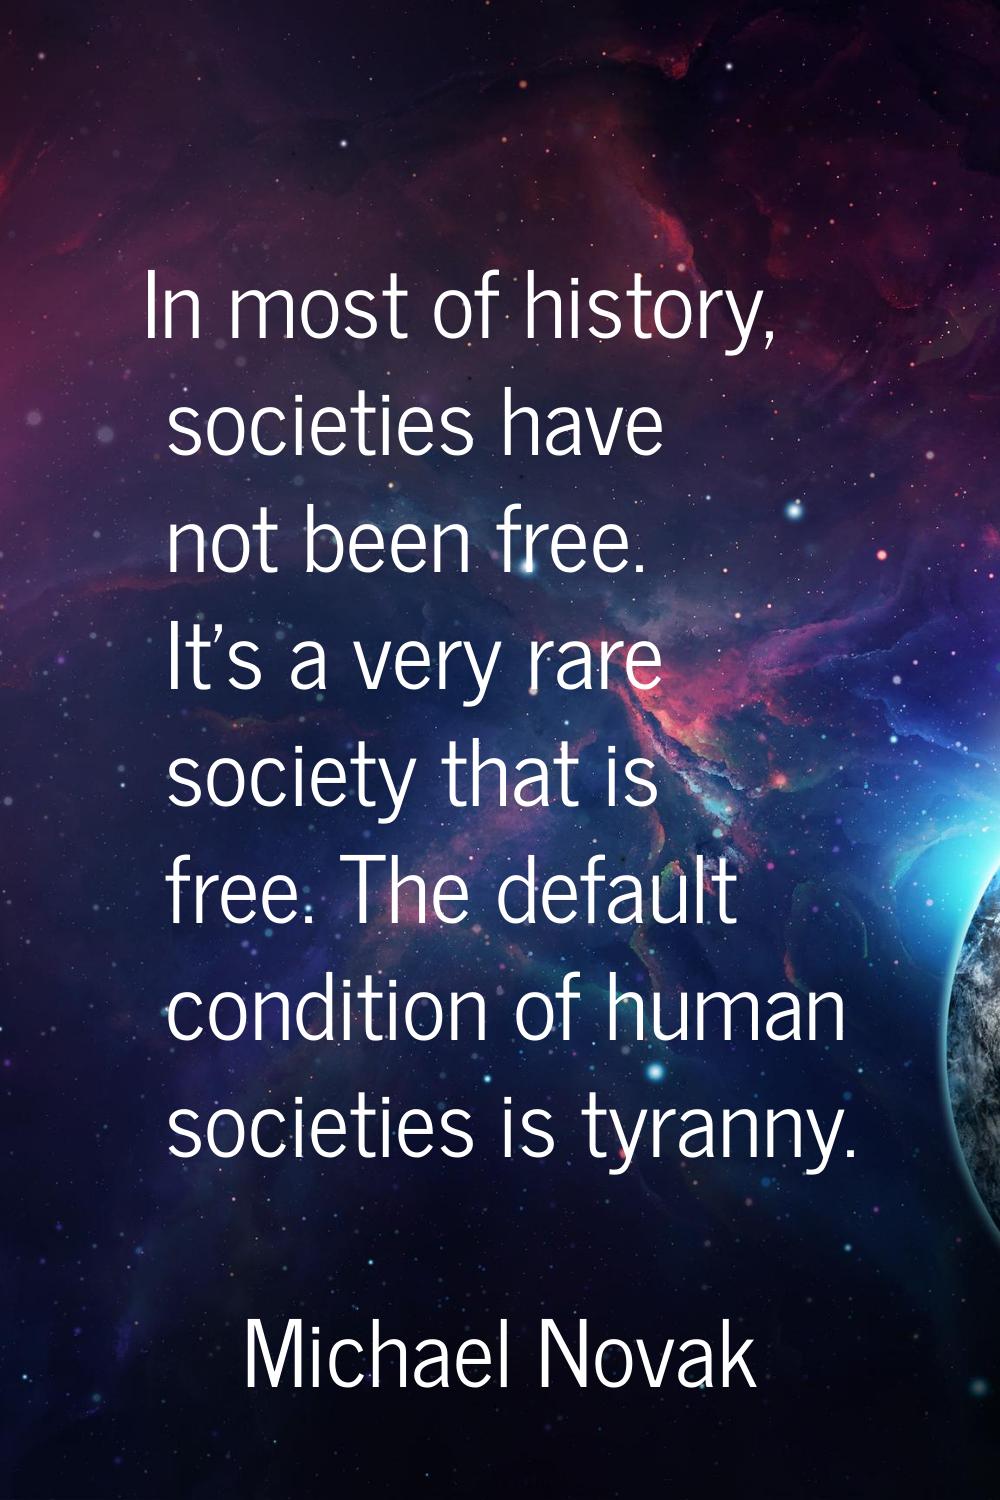 In most of history, societies have not been free. It's a very rare society that is free. The defaul